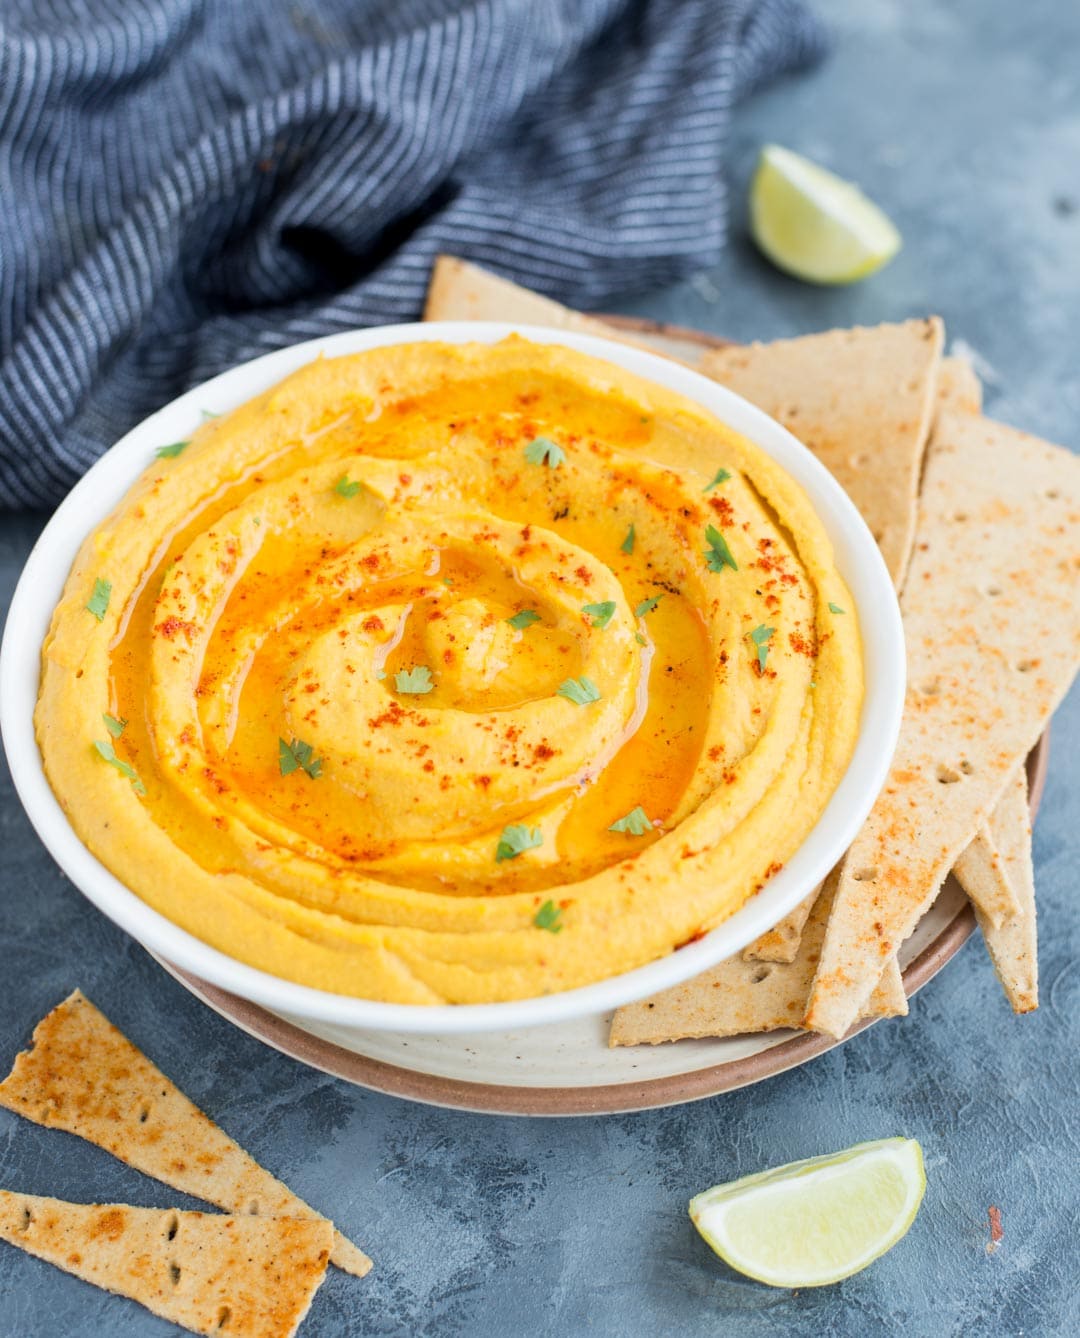 This Sweet Potato Hummus is creamy, delicious and has a hint of sweetness from the Sweet potato. This homemade hummus is great as a dip or as a healthy spread on wraps and sandwiches.